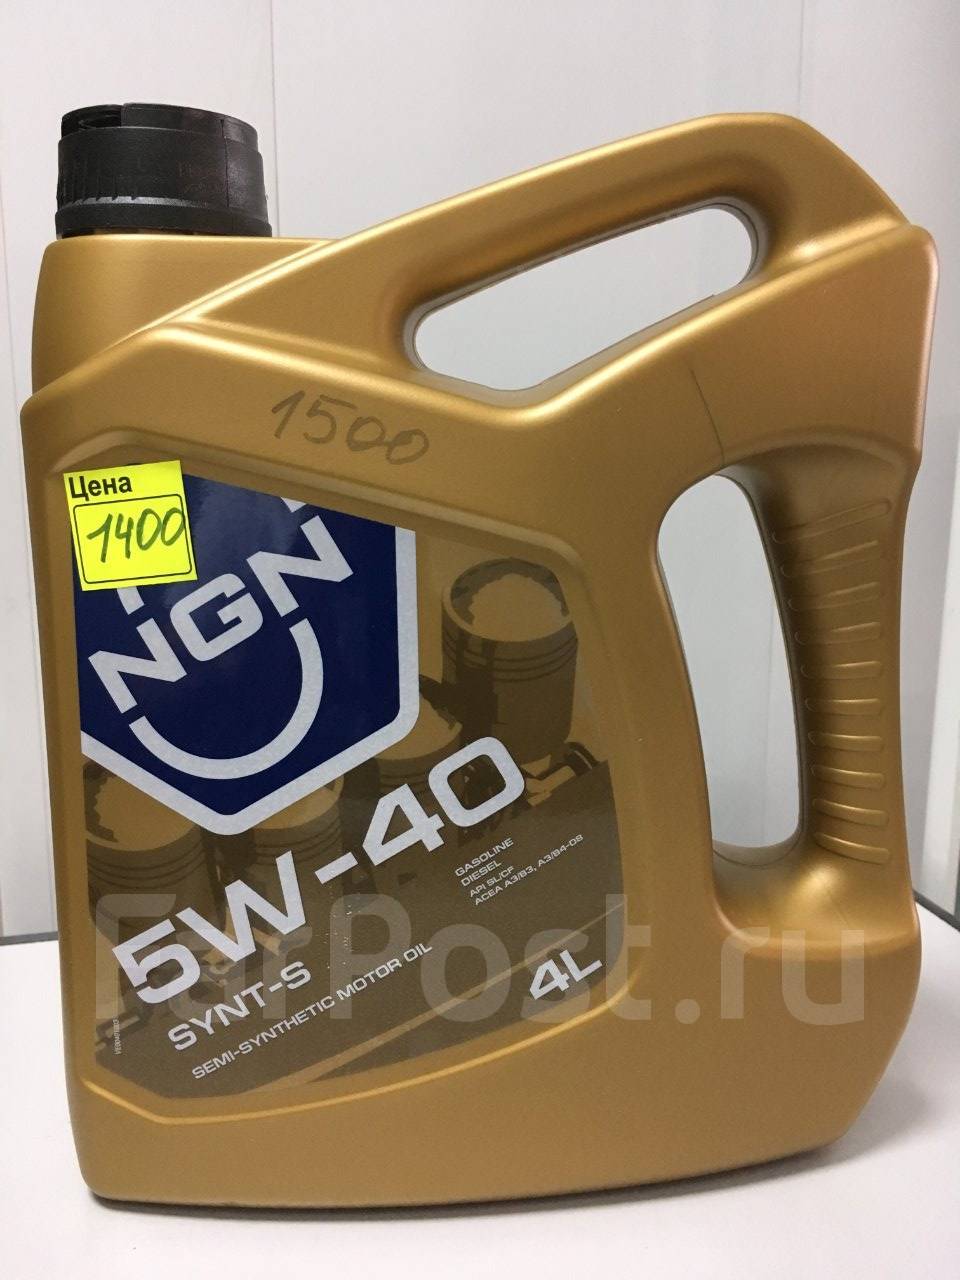 Масло моторное gold 5w 40. NGN Gold 5w-40 (4 литра). 5w-40 Synt-s SL/CF 4л полусинт. NGN Gold 5w40 SN/CF 4л синт. 5w-40 Gold SN/CF 4л (синт. Мотор. Масло) NGN.